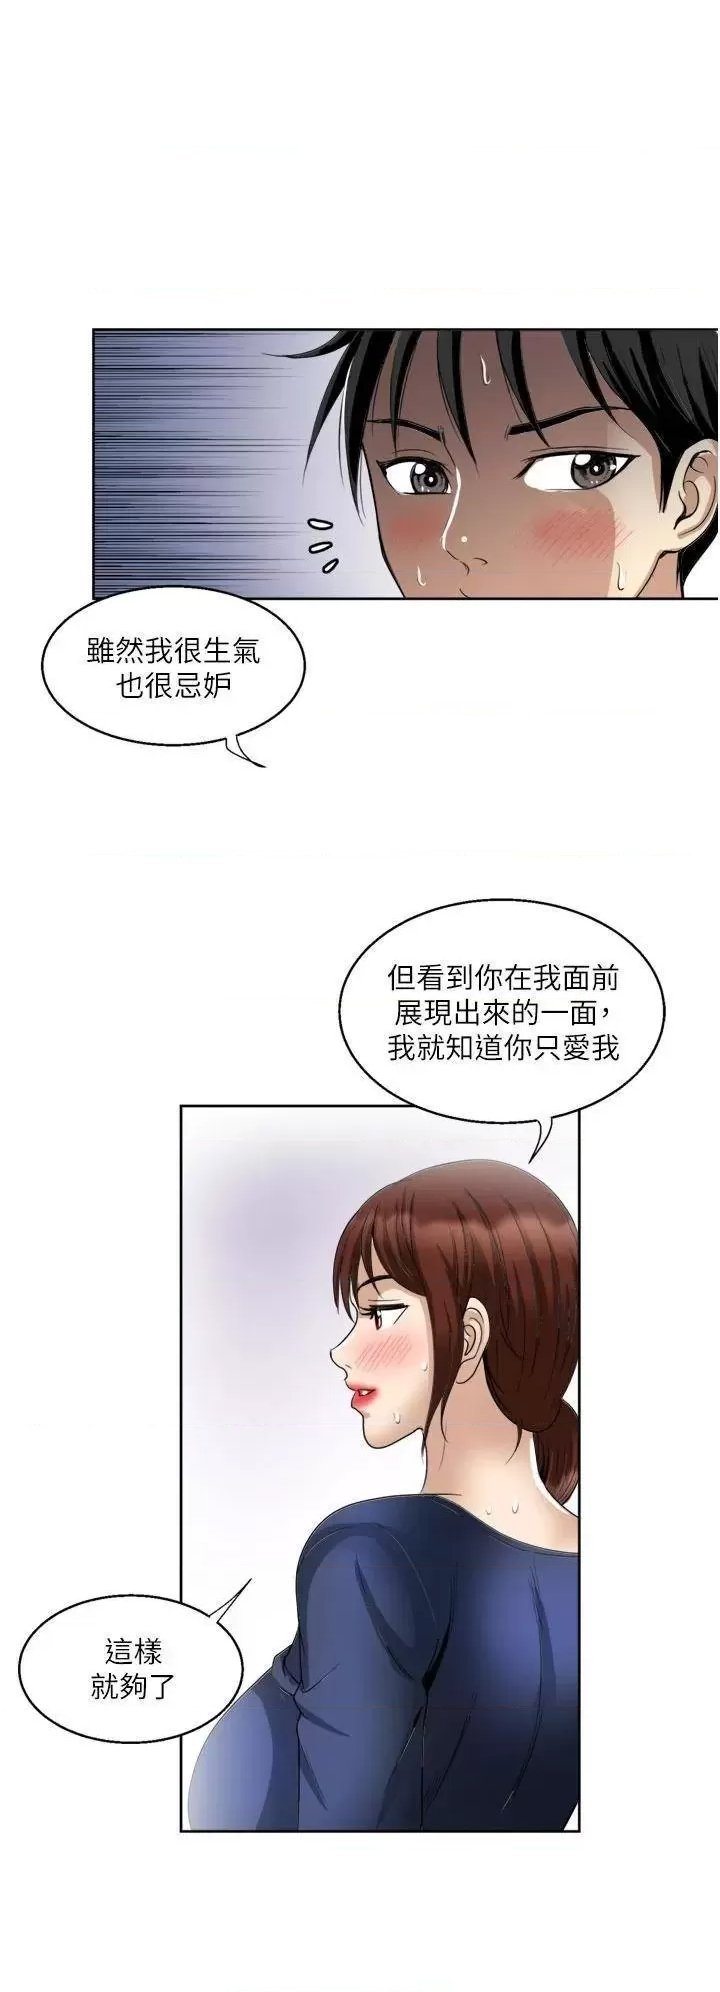 just-once-raw-chap-23-29